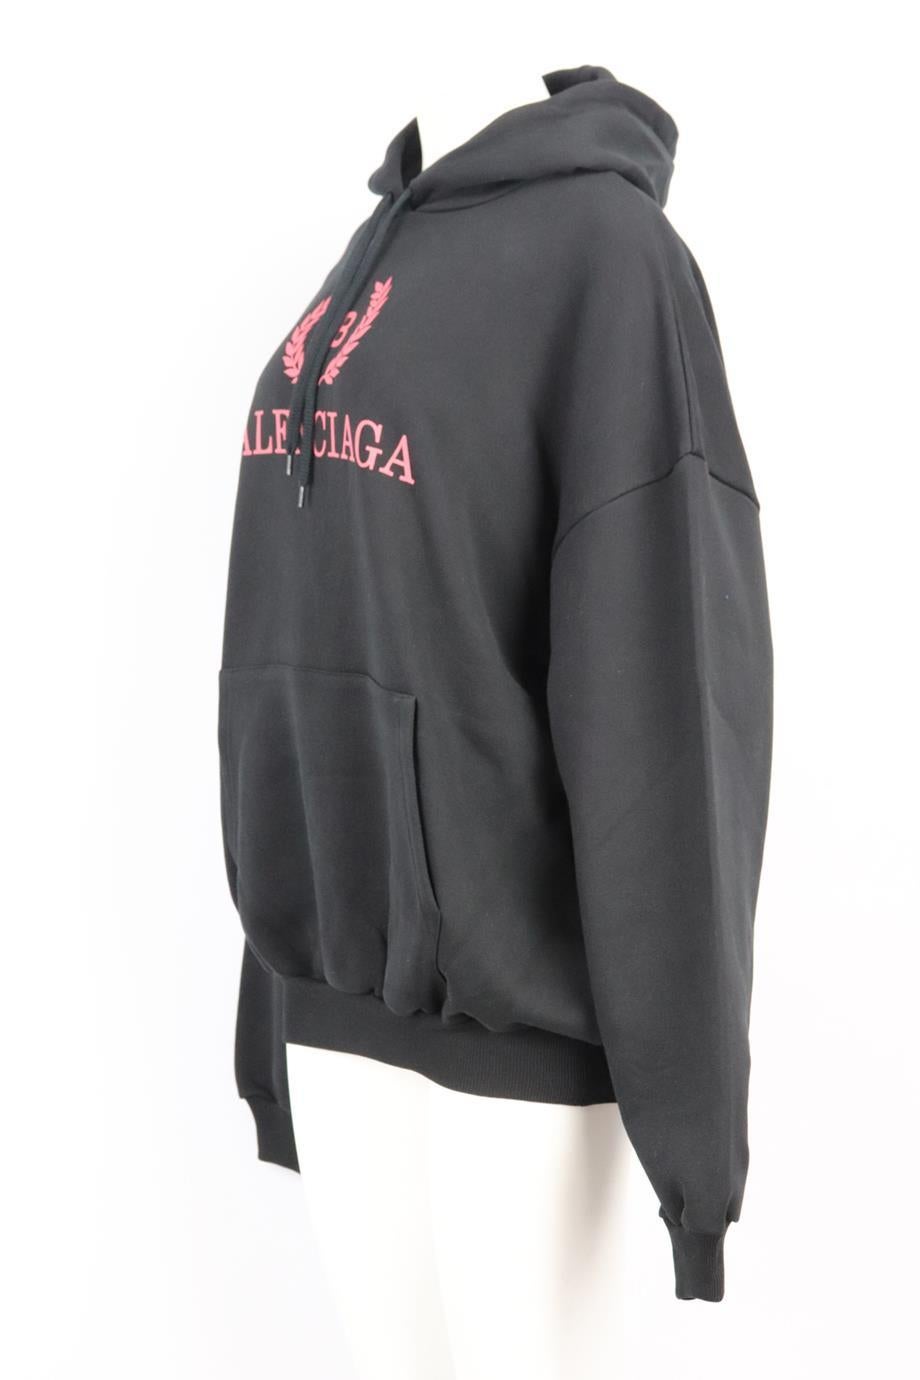 Balenciaga Oversized Printed Cotton Jersey Hoodie Medium In Excellent Condition In London, GB